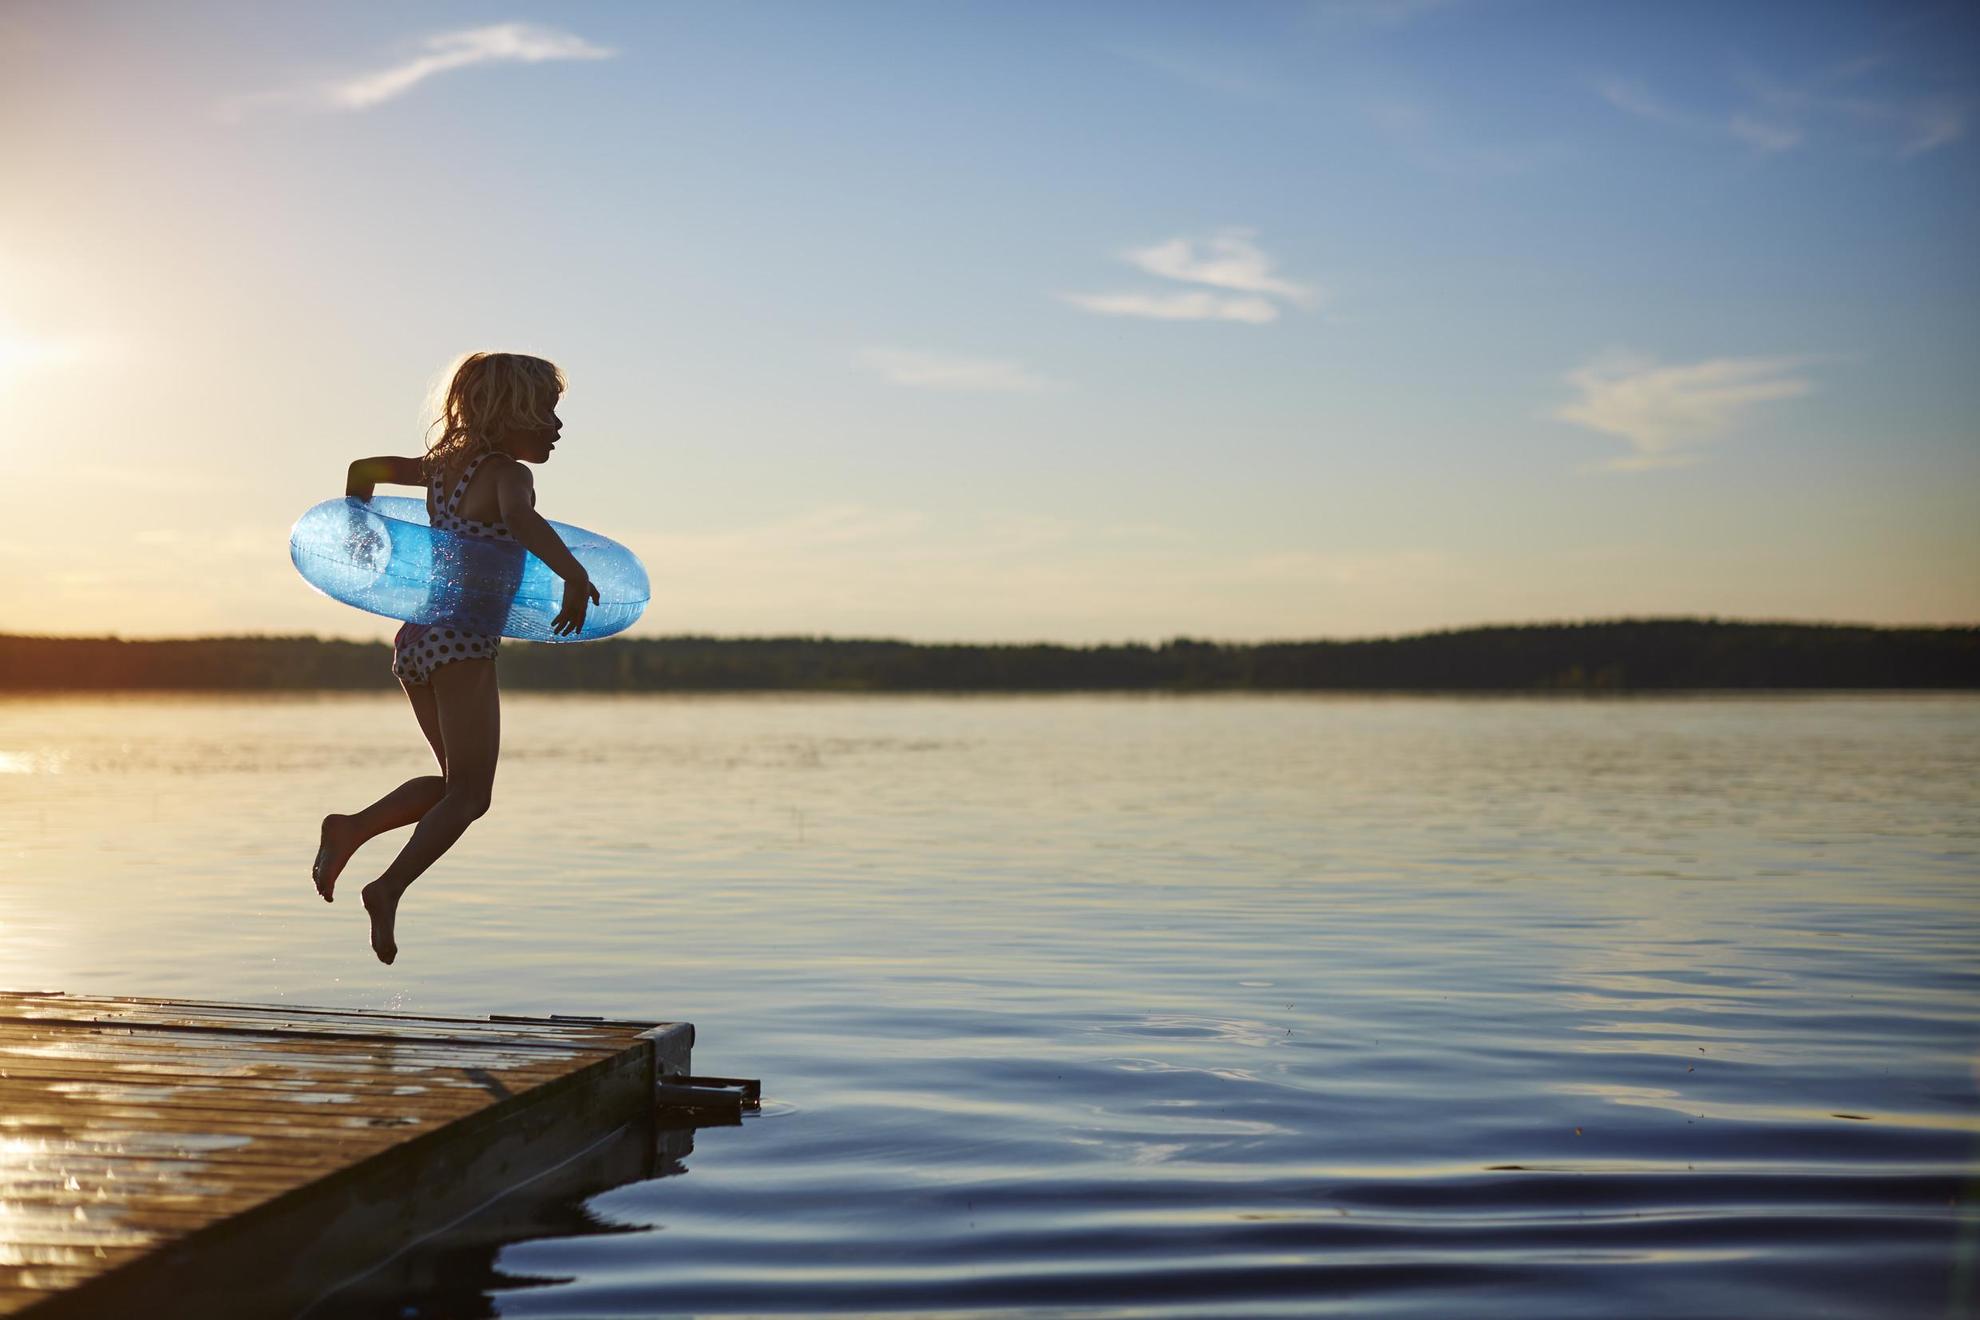 A girl with an inflatable swim ring is jumping into the lake from a wooden pier.